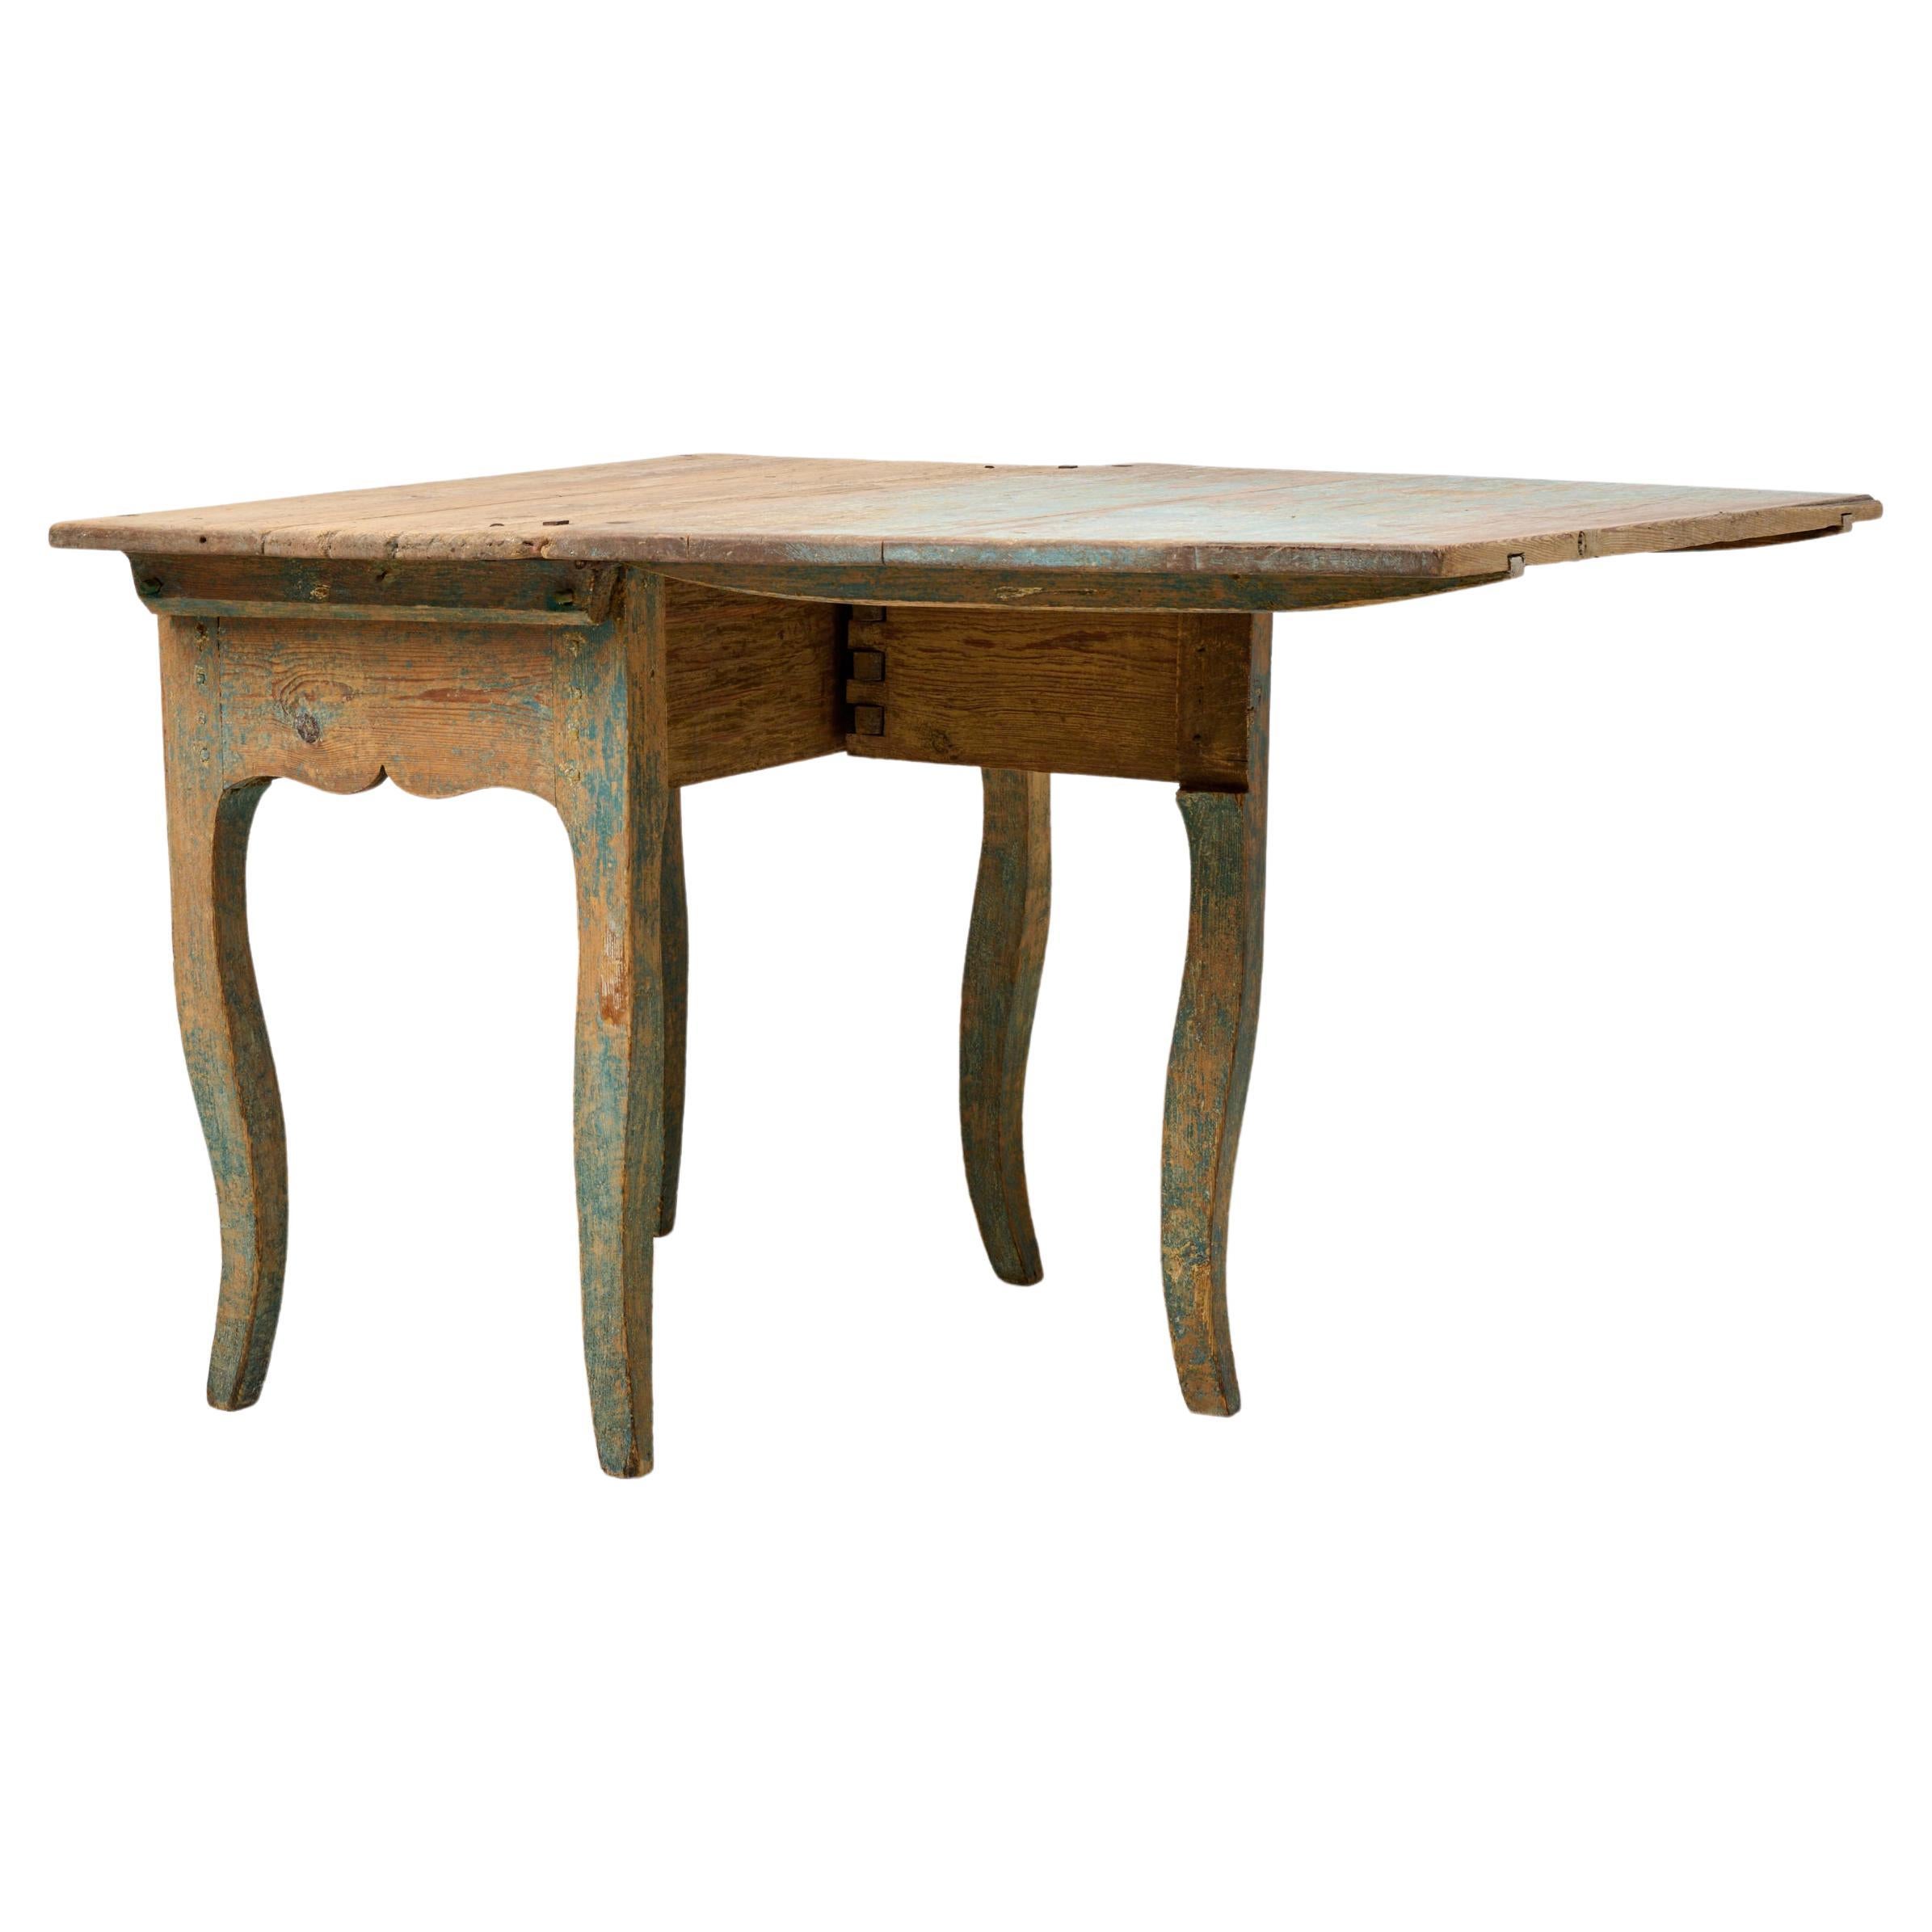 Antique Swedish Rococo Rustic Charming Pine Drop-Leaf Table For Sale